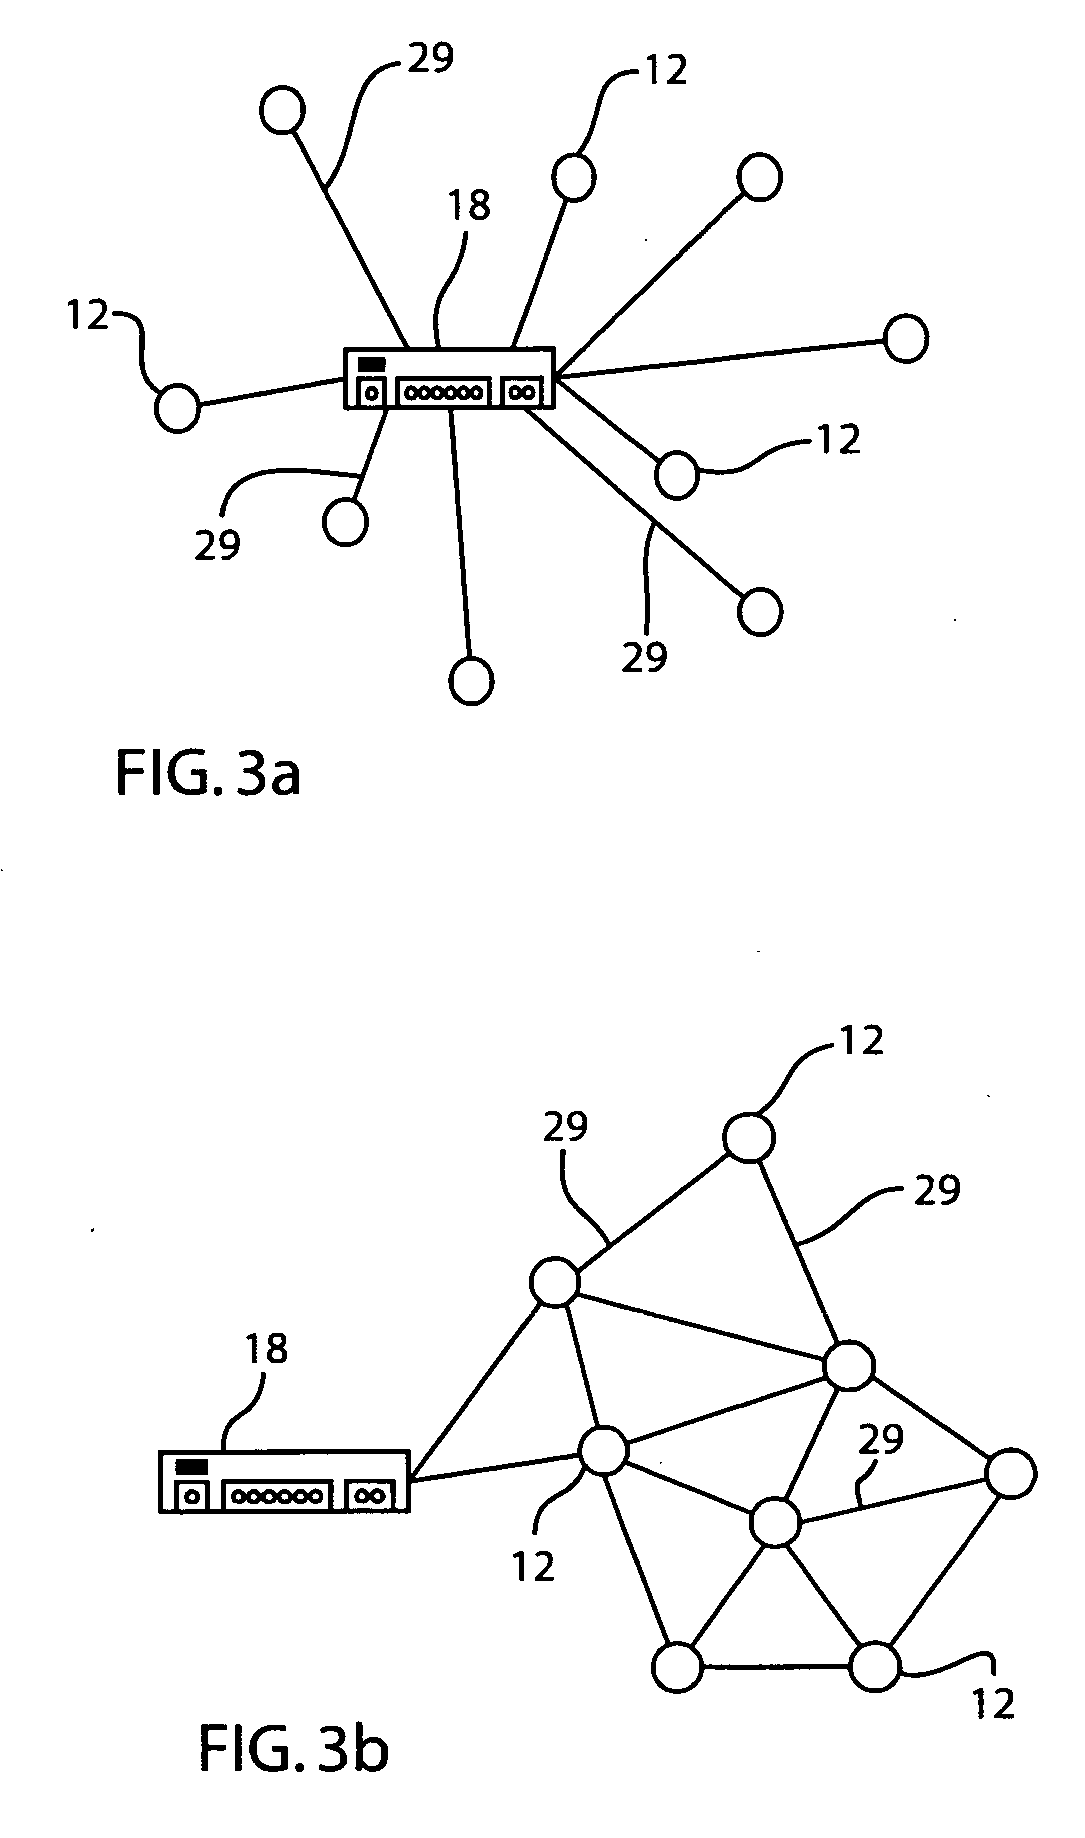 Networked modular and remotely configurable system and method of remotely monitoring patient healthcare characteristics